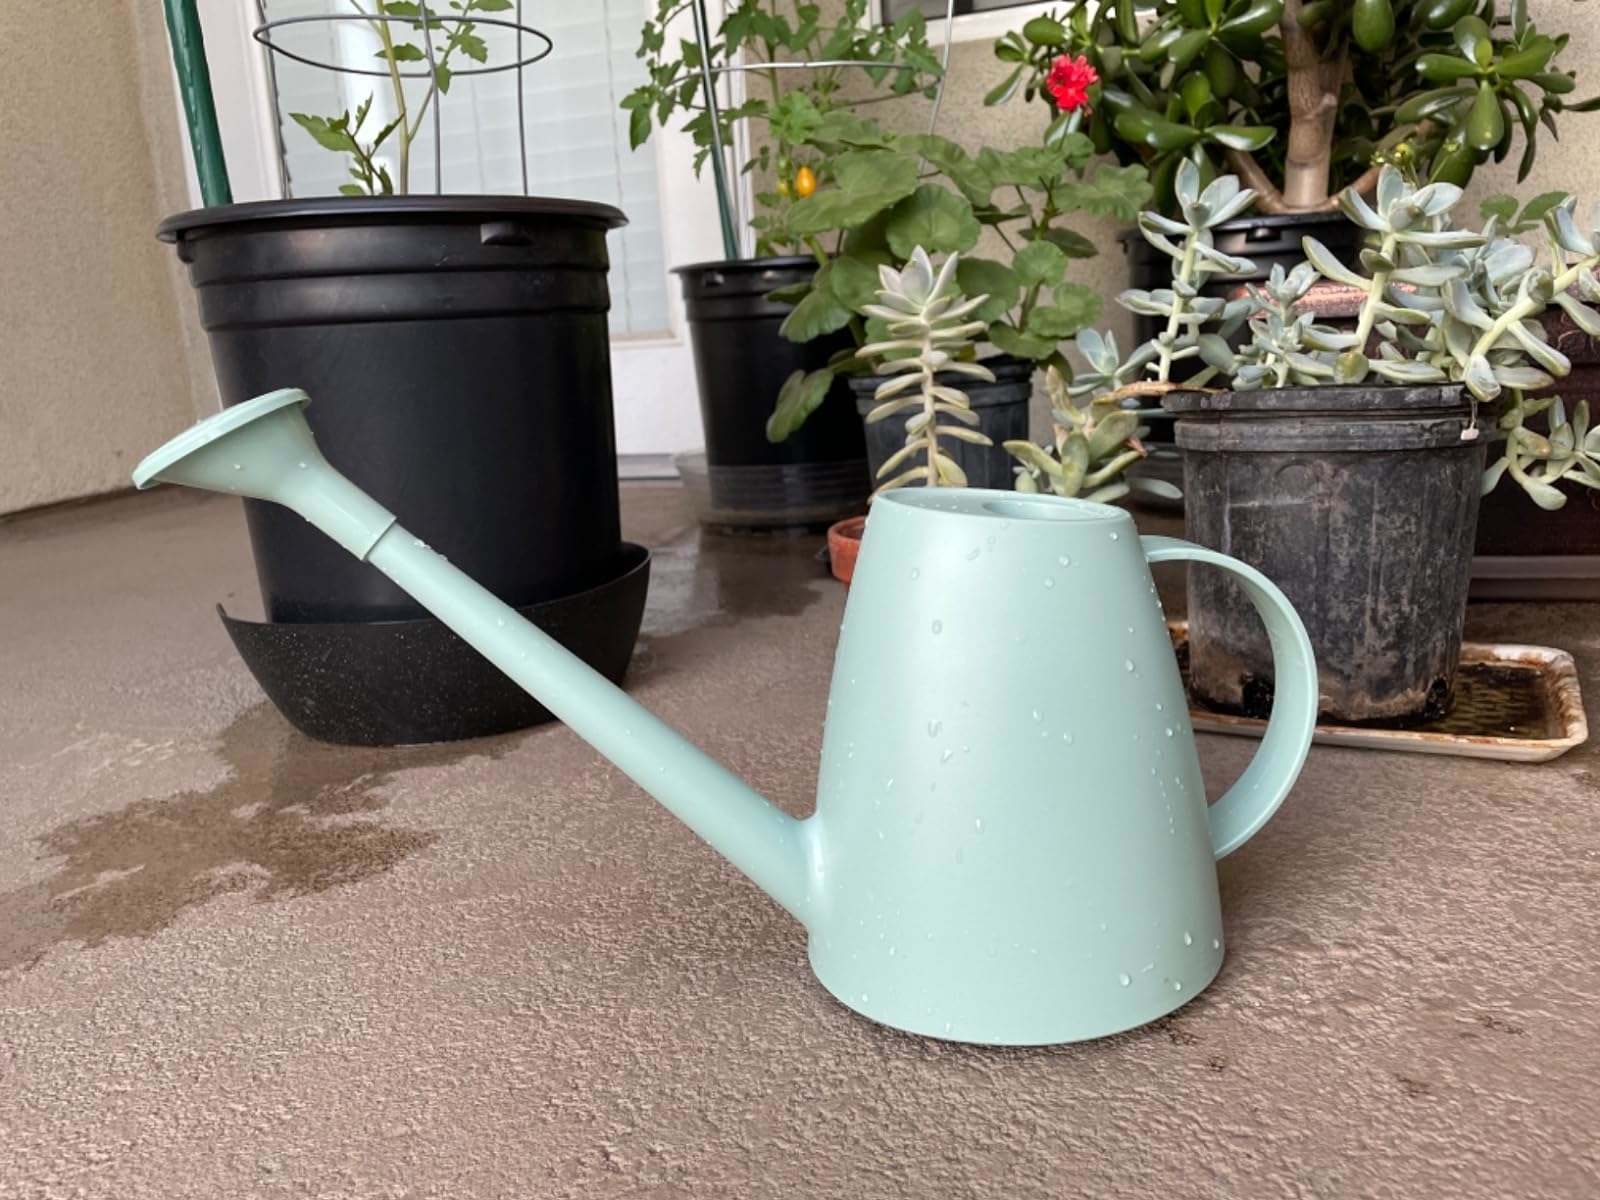 A light green watering can on a concrete surface near various potted plants